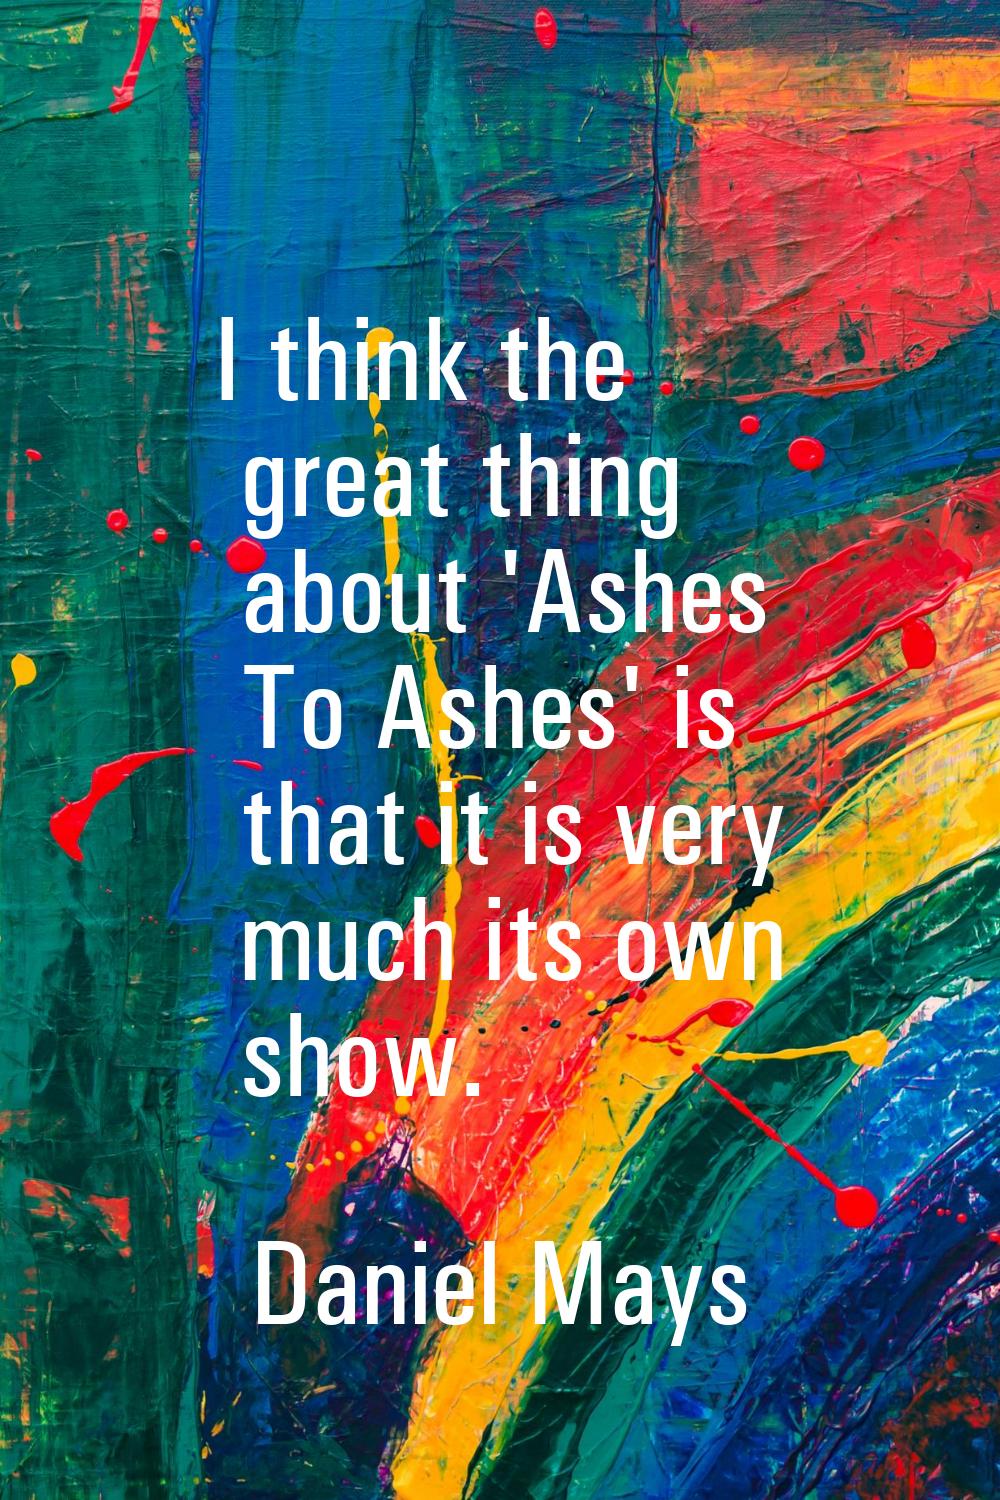 I think the great thing about 'Ashes To Ashes' is that it is very much its own show.